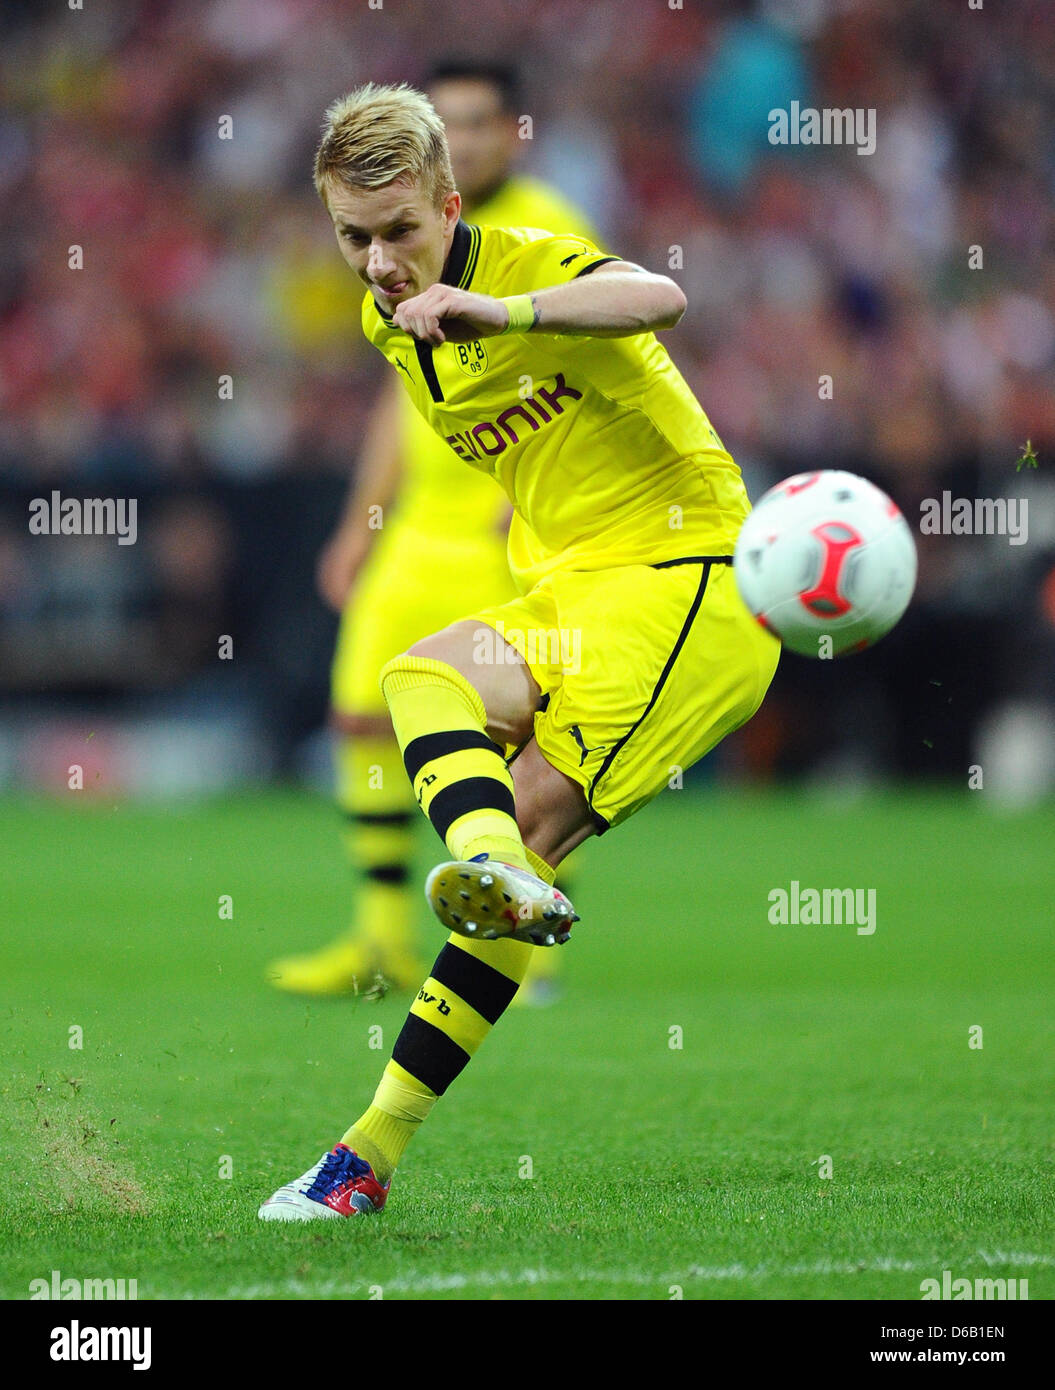 Dortmund's Marco Reus plays the ball during the DFL Super Cup final match between FC Bayern Munich and Borussia Dortmund at the Allianz Arena in Munich, Germany, 12 August 2012. Photo: Thomas Eisenhuth Stock Photo